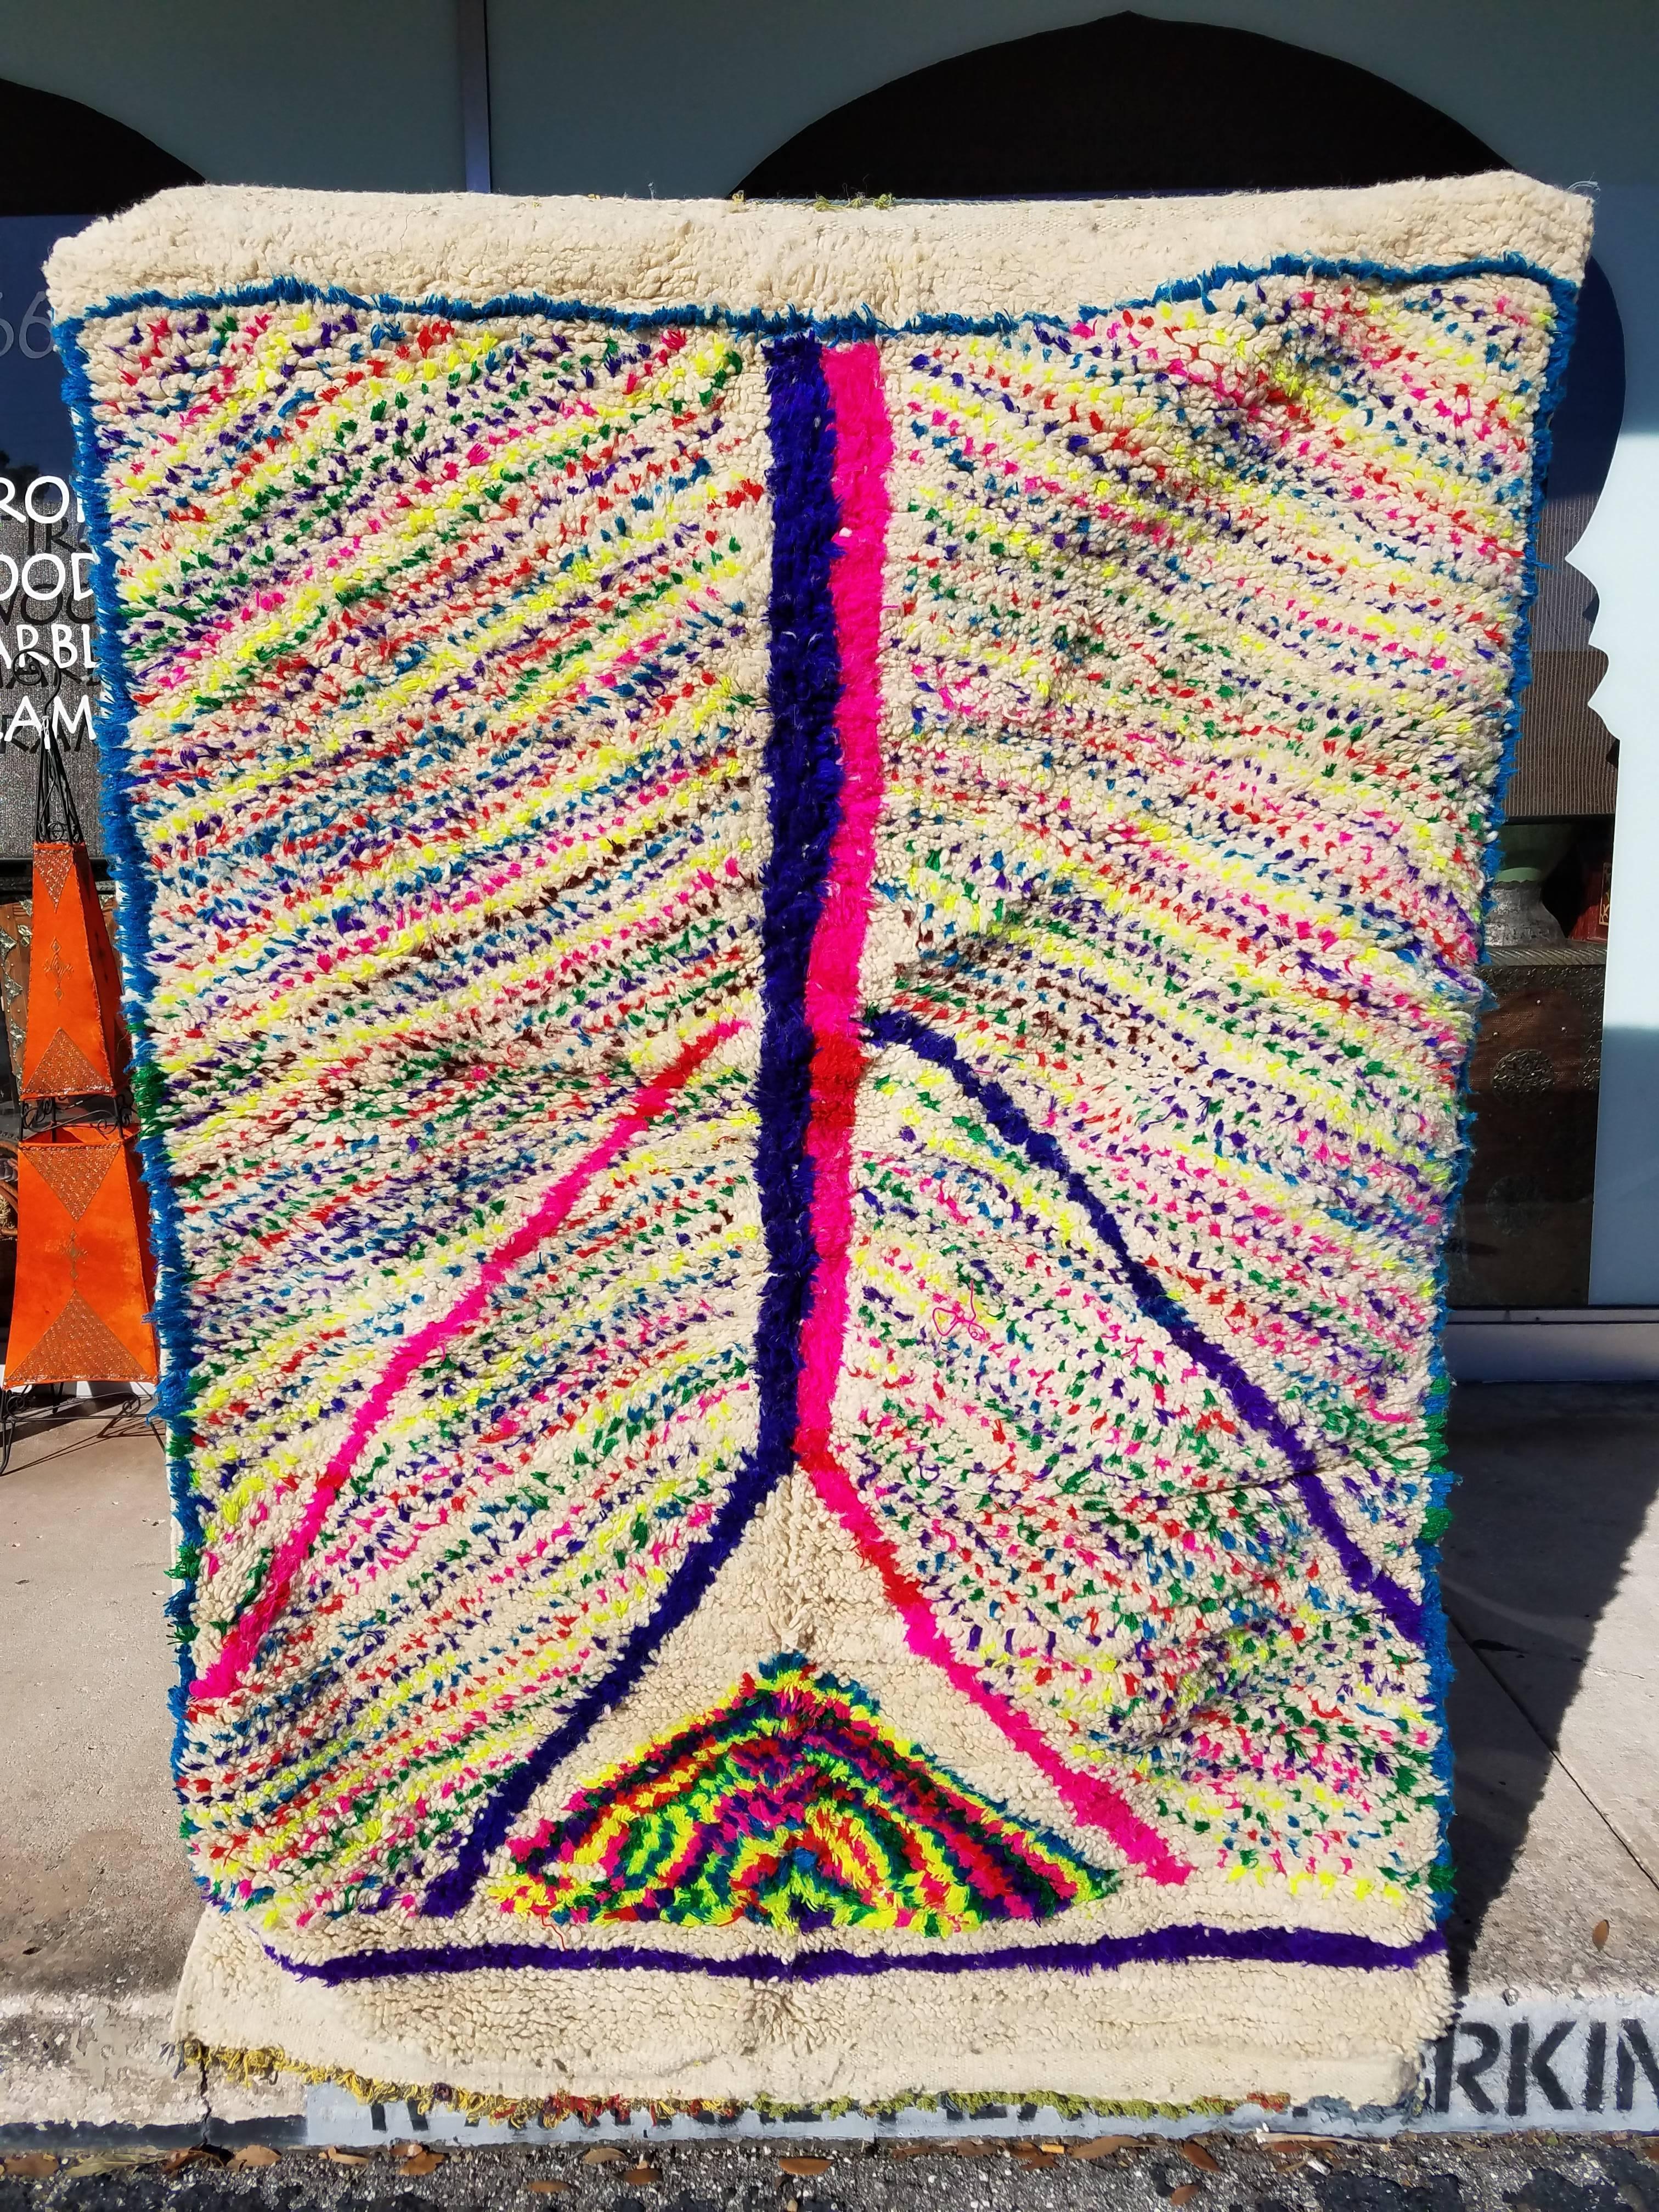 A unique and hard to find multicolor rug form Bejaad - also known as Boujaad – in the Middle Atlas Mountains of beautiful Morocco. Measuring approximately 6’2” x 4’2”, and adorned with beautiful patches of neon greens, yellows, pinks, and others.